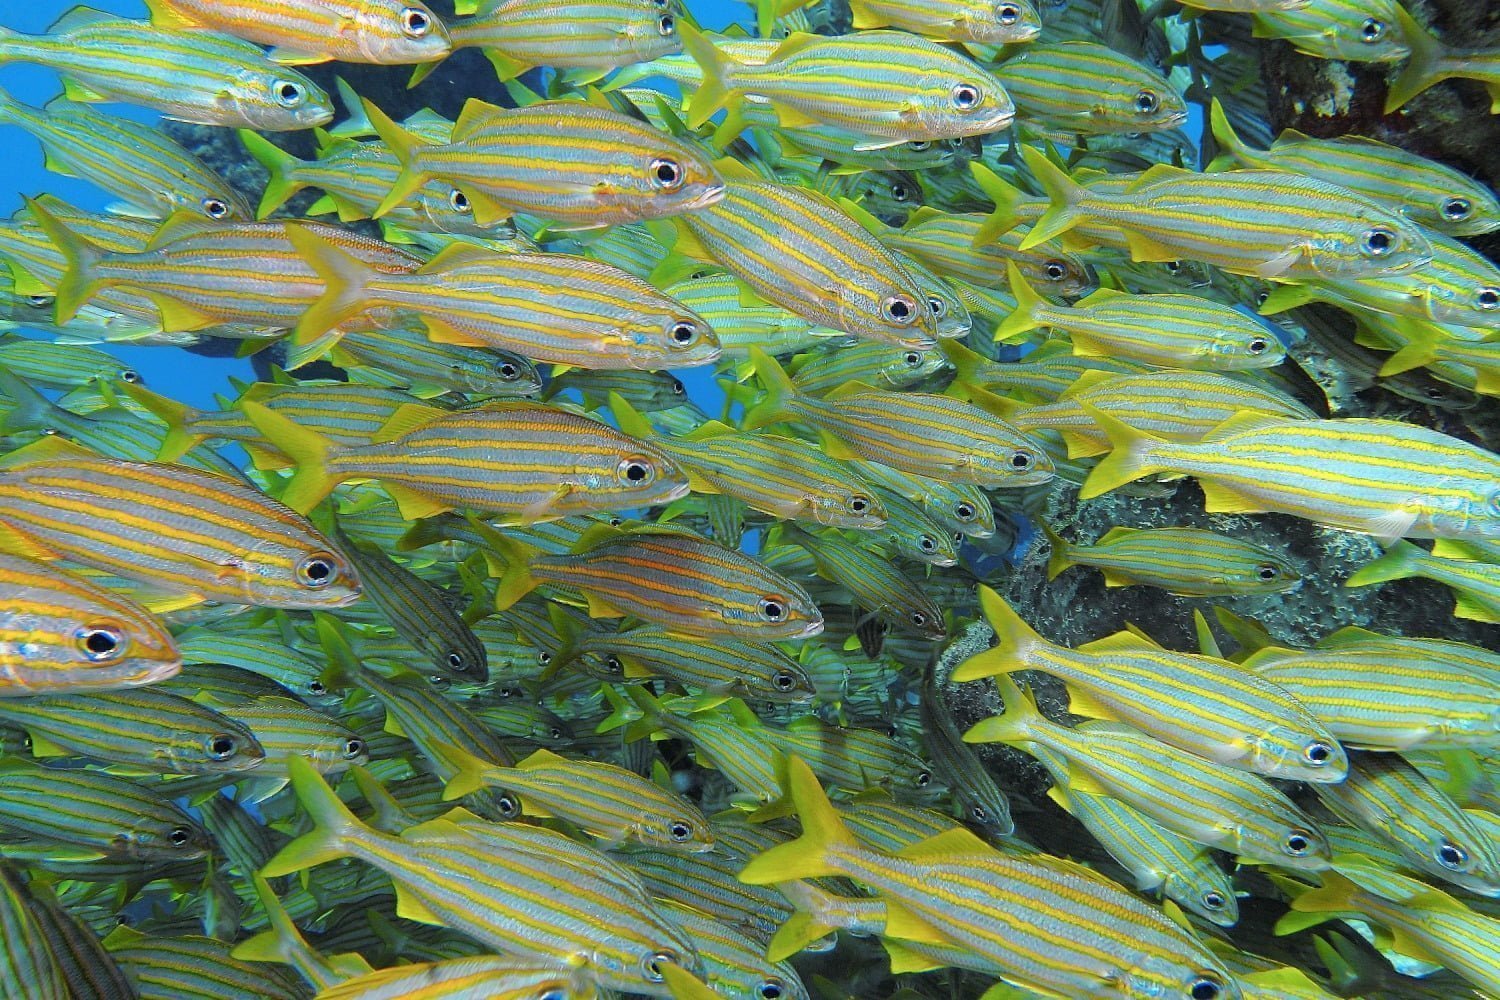 Snorkeling with a school of fish